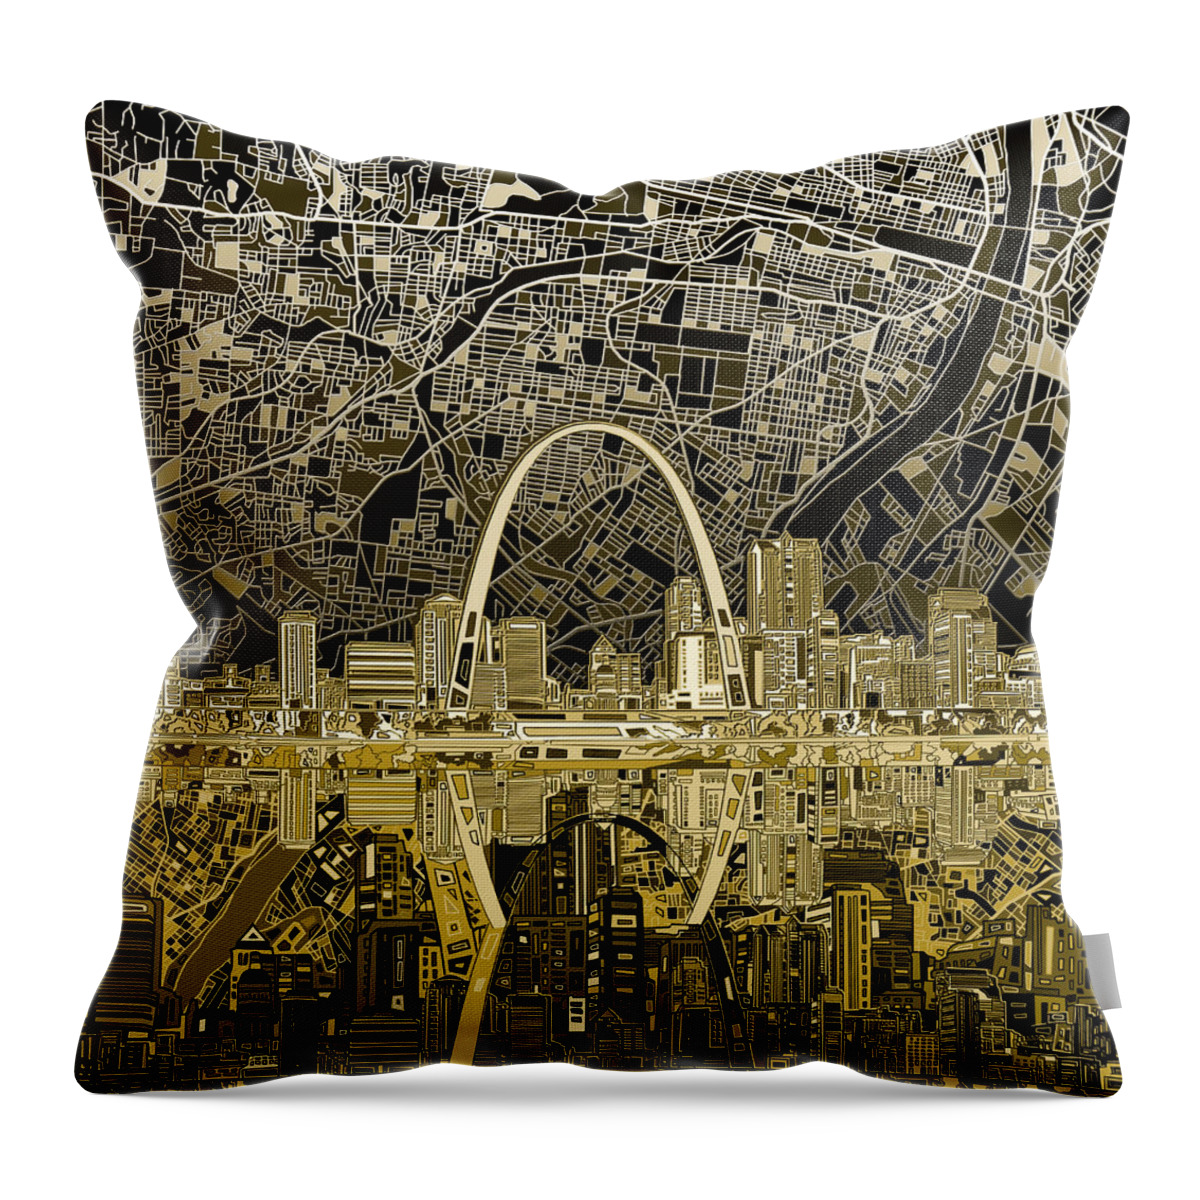 St Louis Skyline Throw Pillow featuring the painting St Louis Skyline Abstract by Bekim M